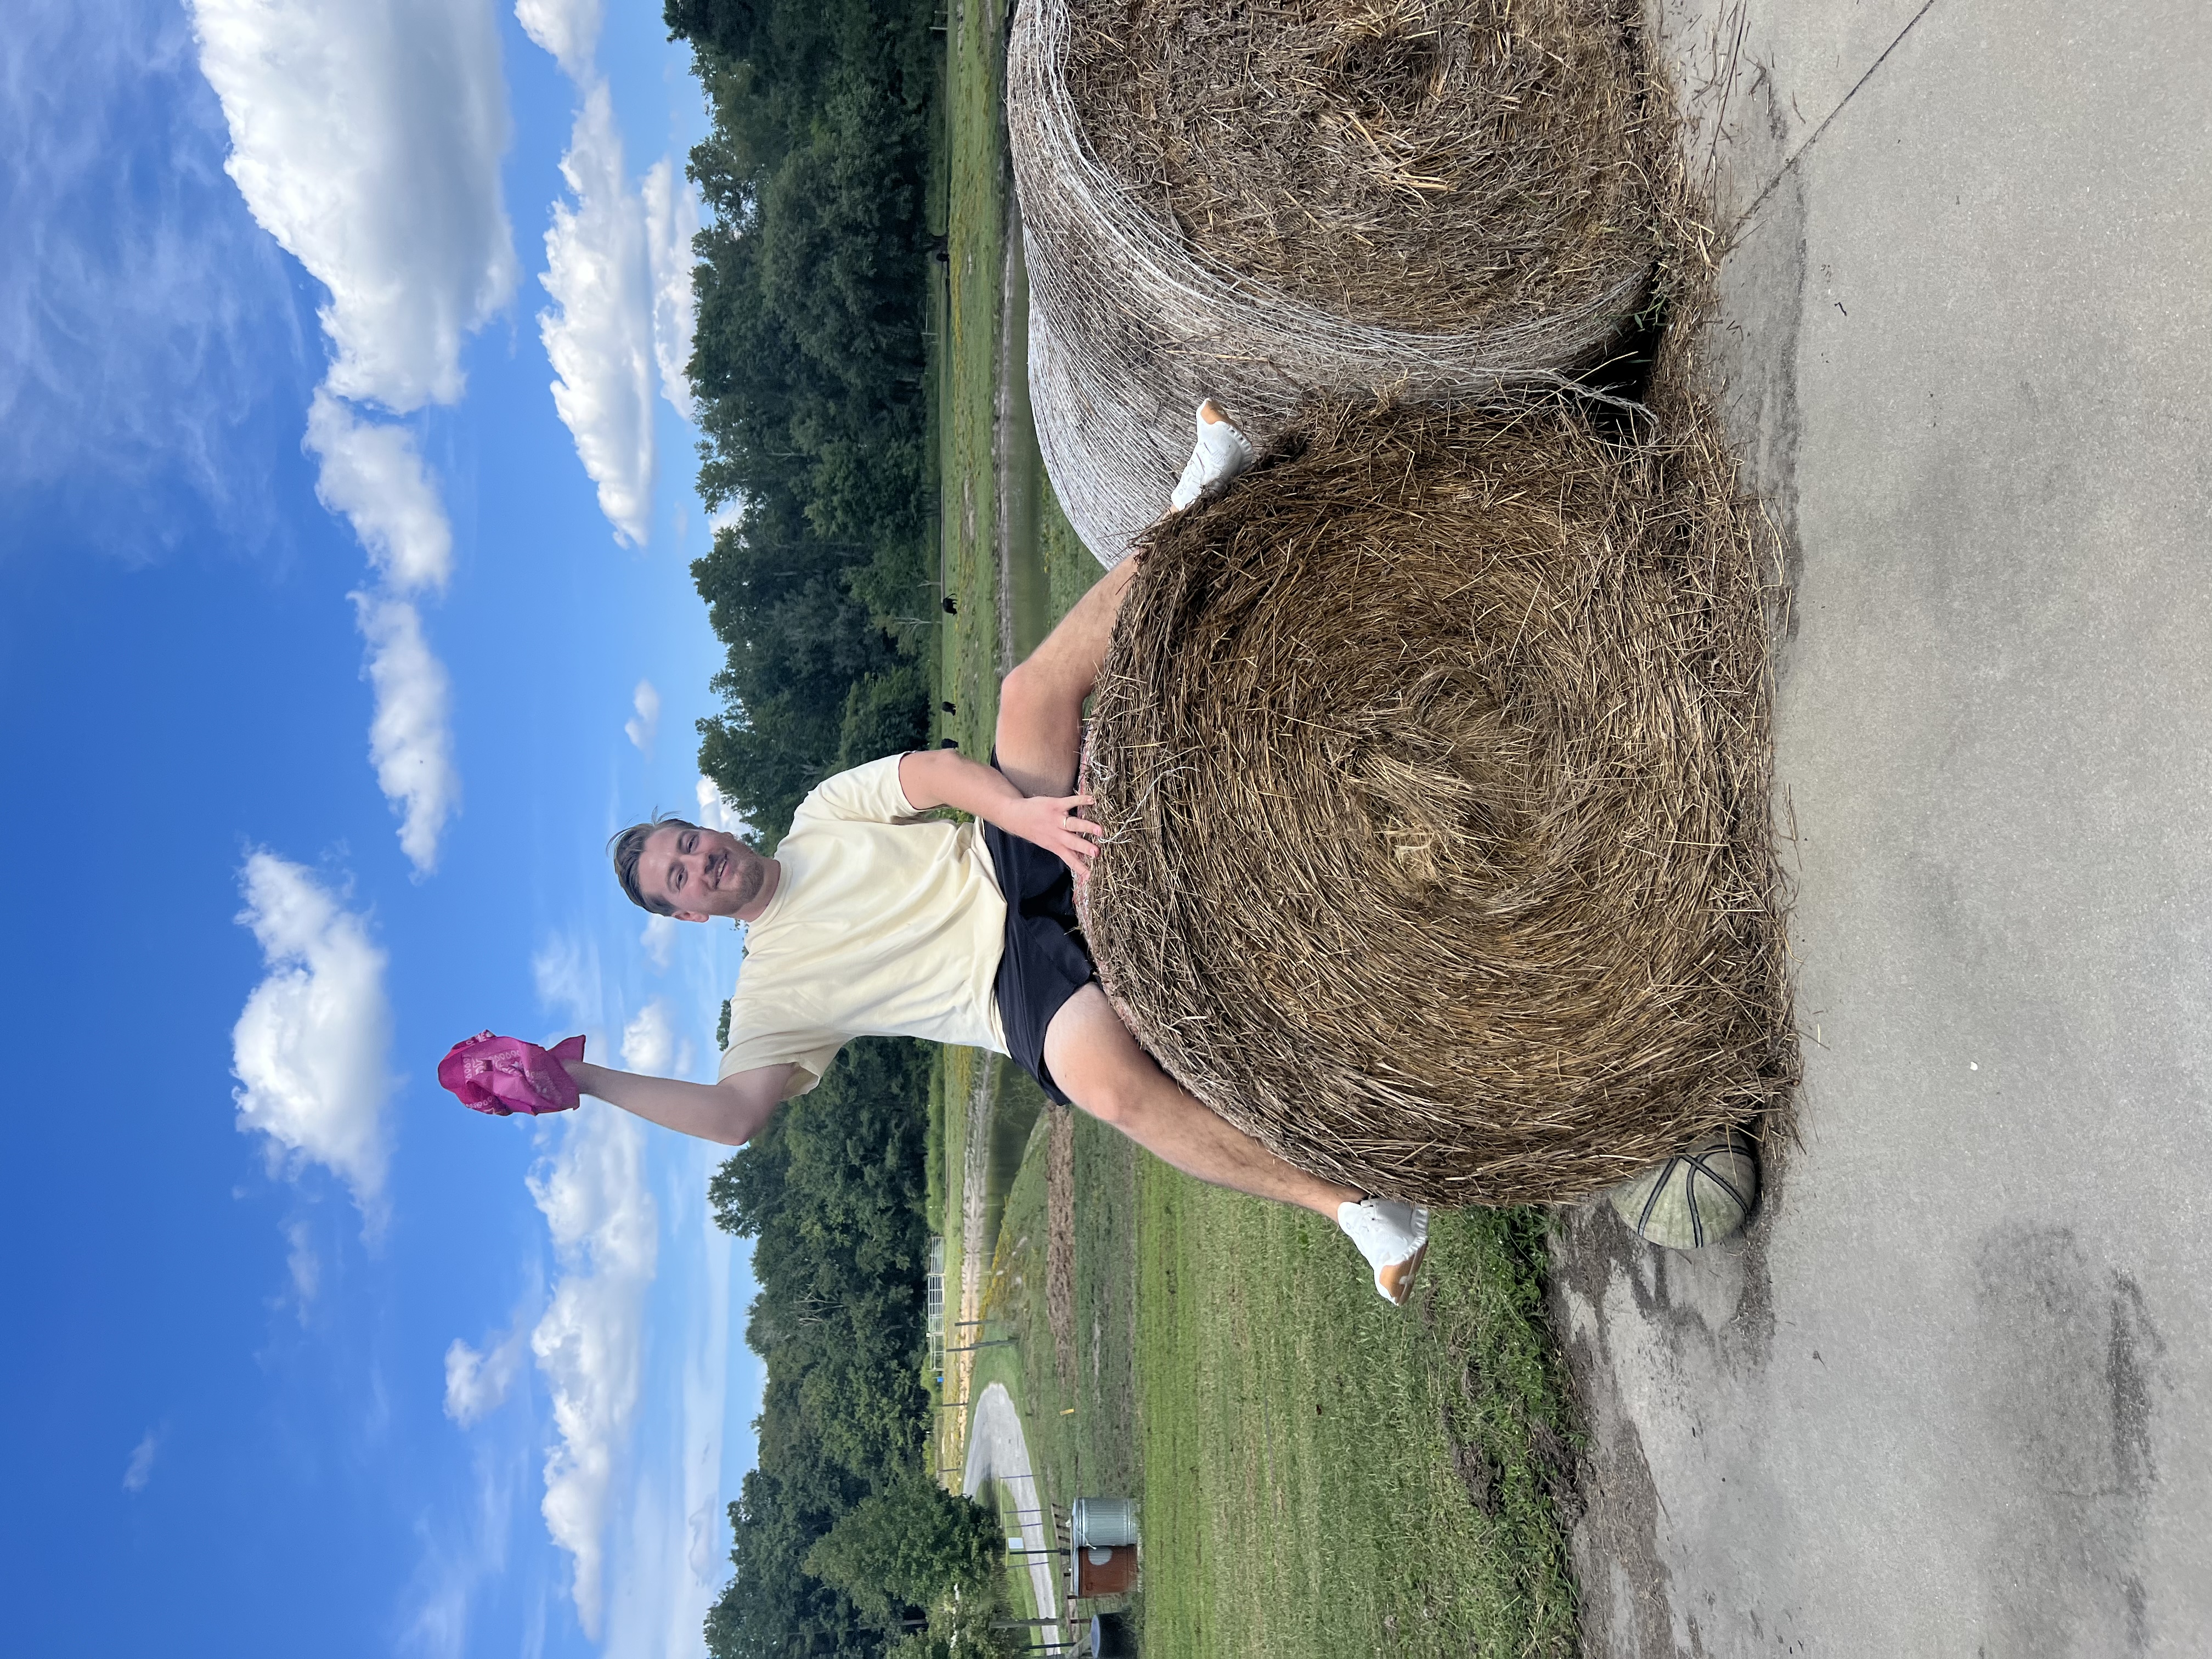 Climb on a round bale of hay